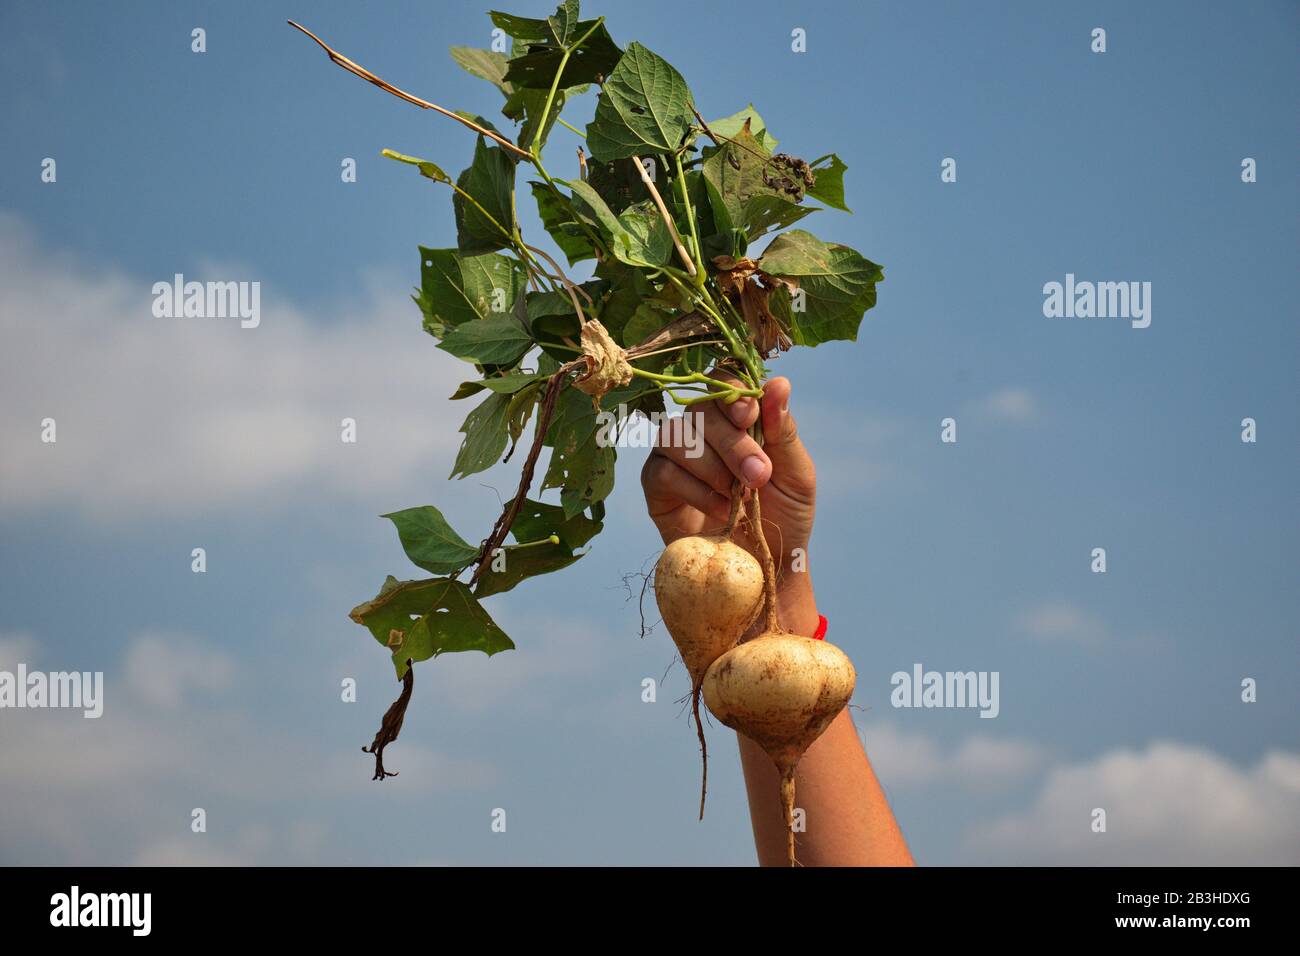 Human hand holding turnip against the blue sky Stock Photo